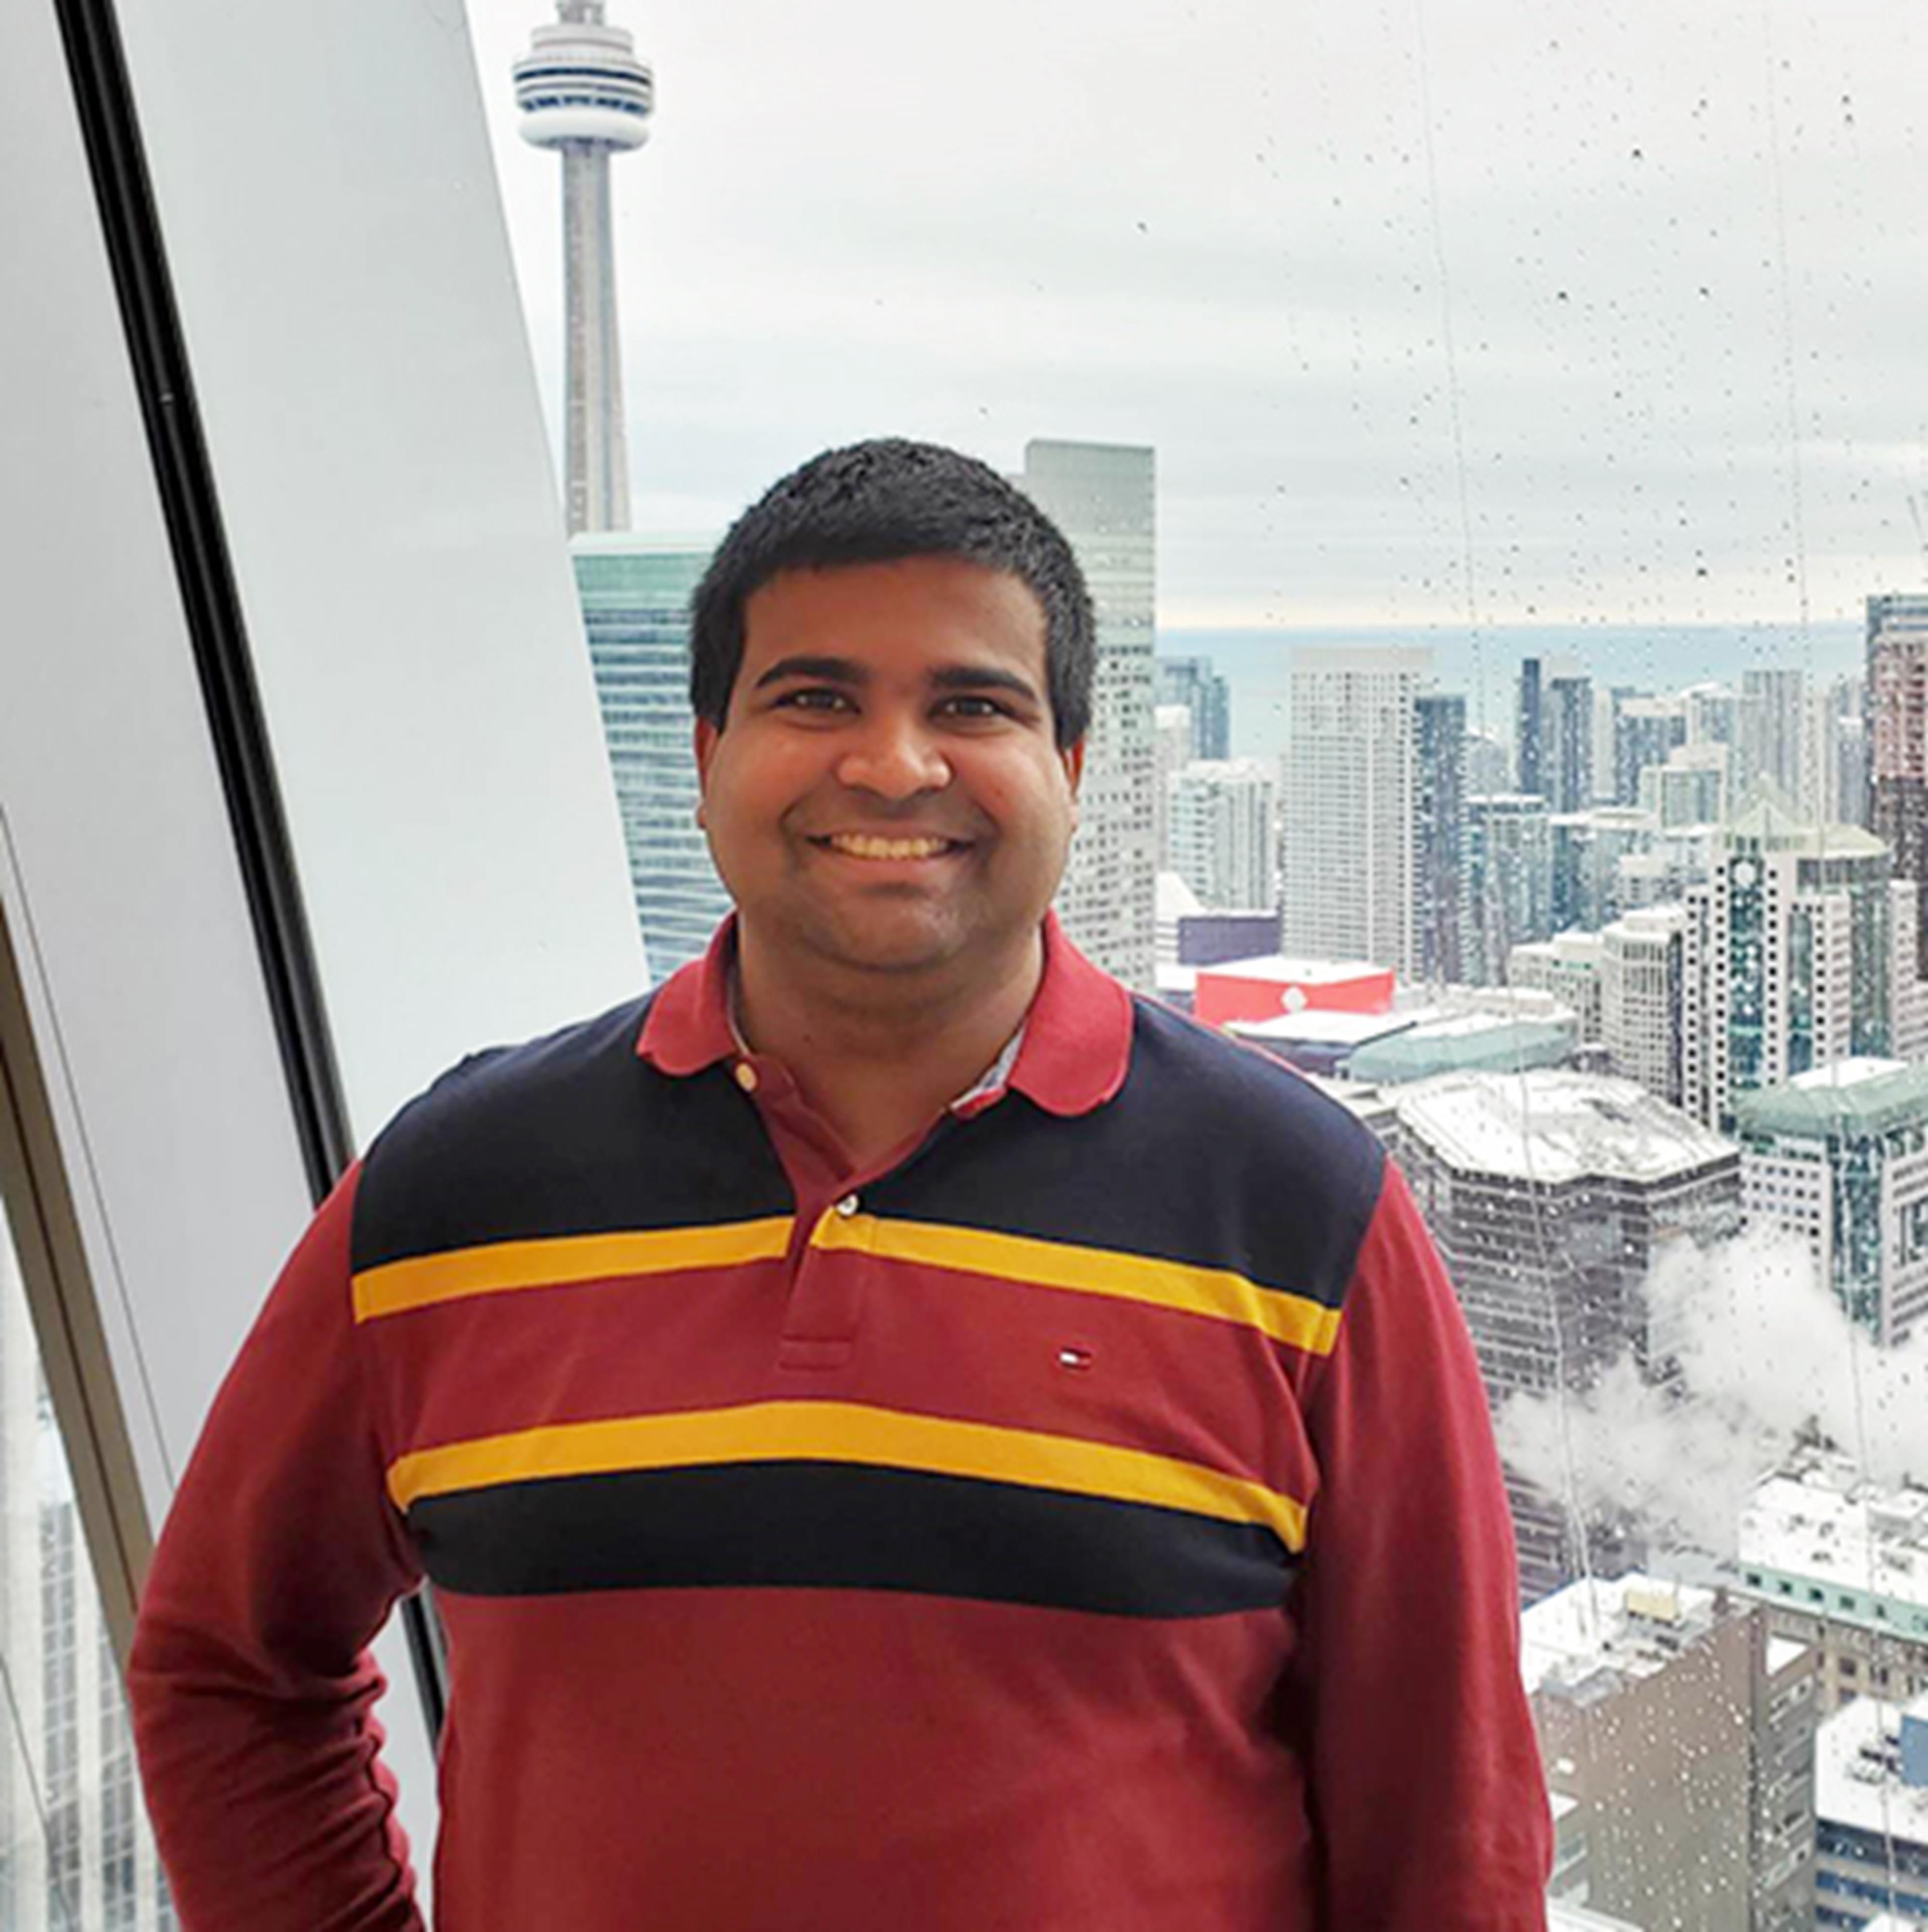 Dilshan in front of high rise building window with CN Tower and city buildings in the background